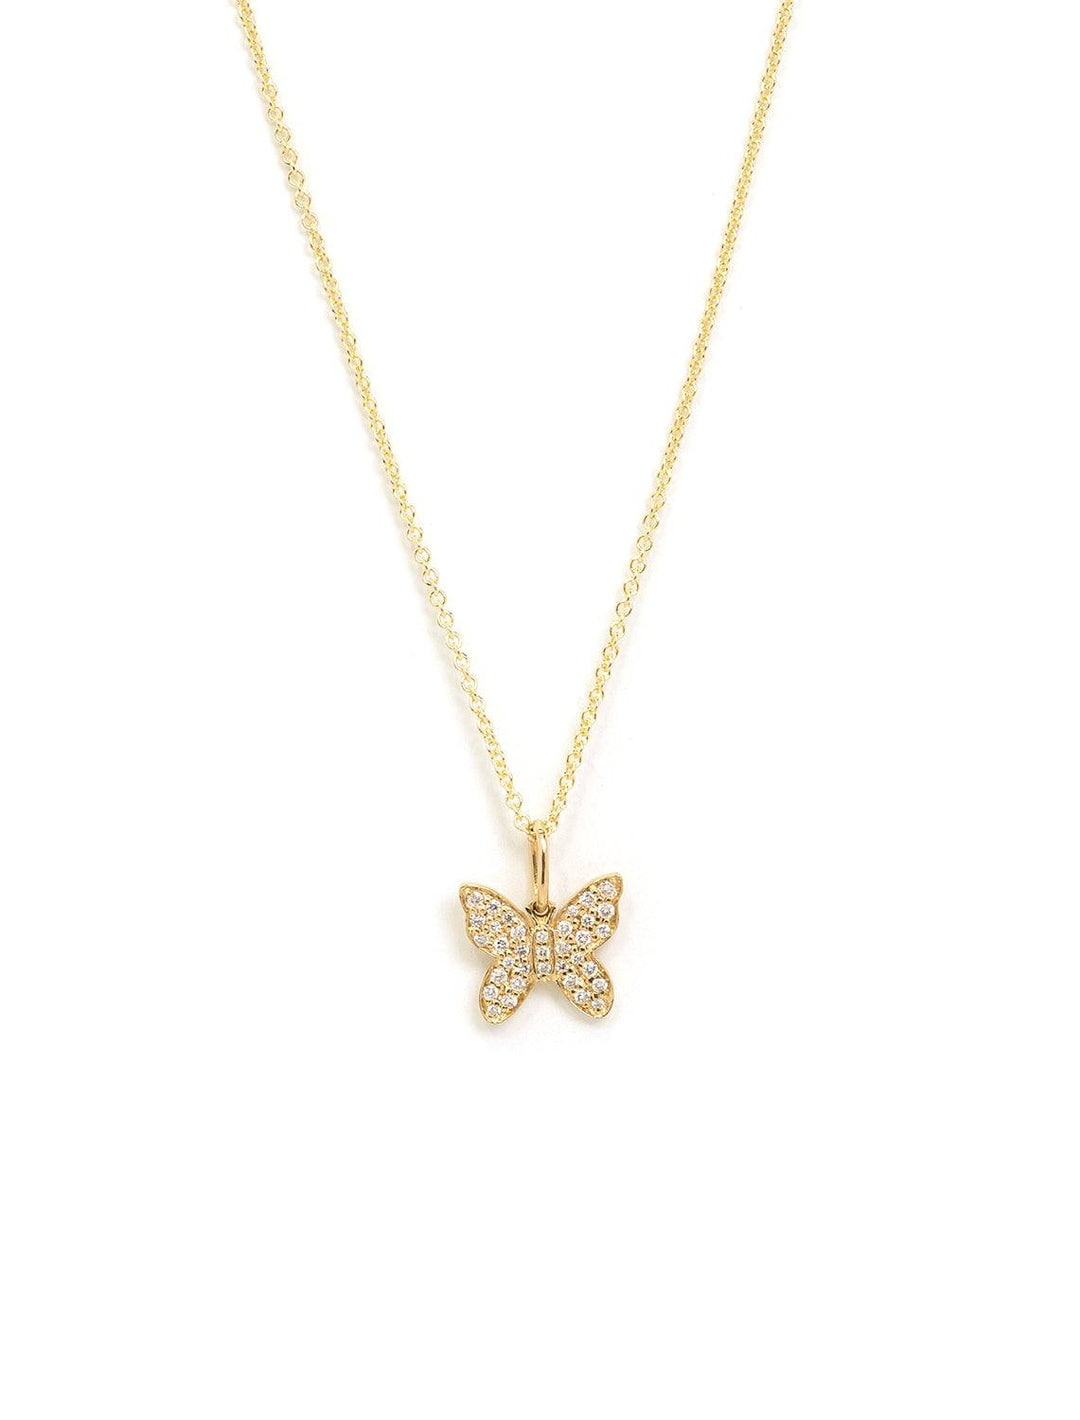 Front view of Sydney Evan's mini pave butterfly necklace.